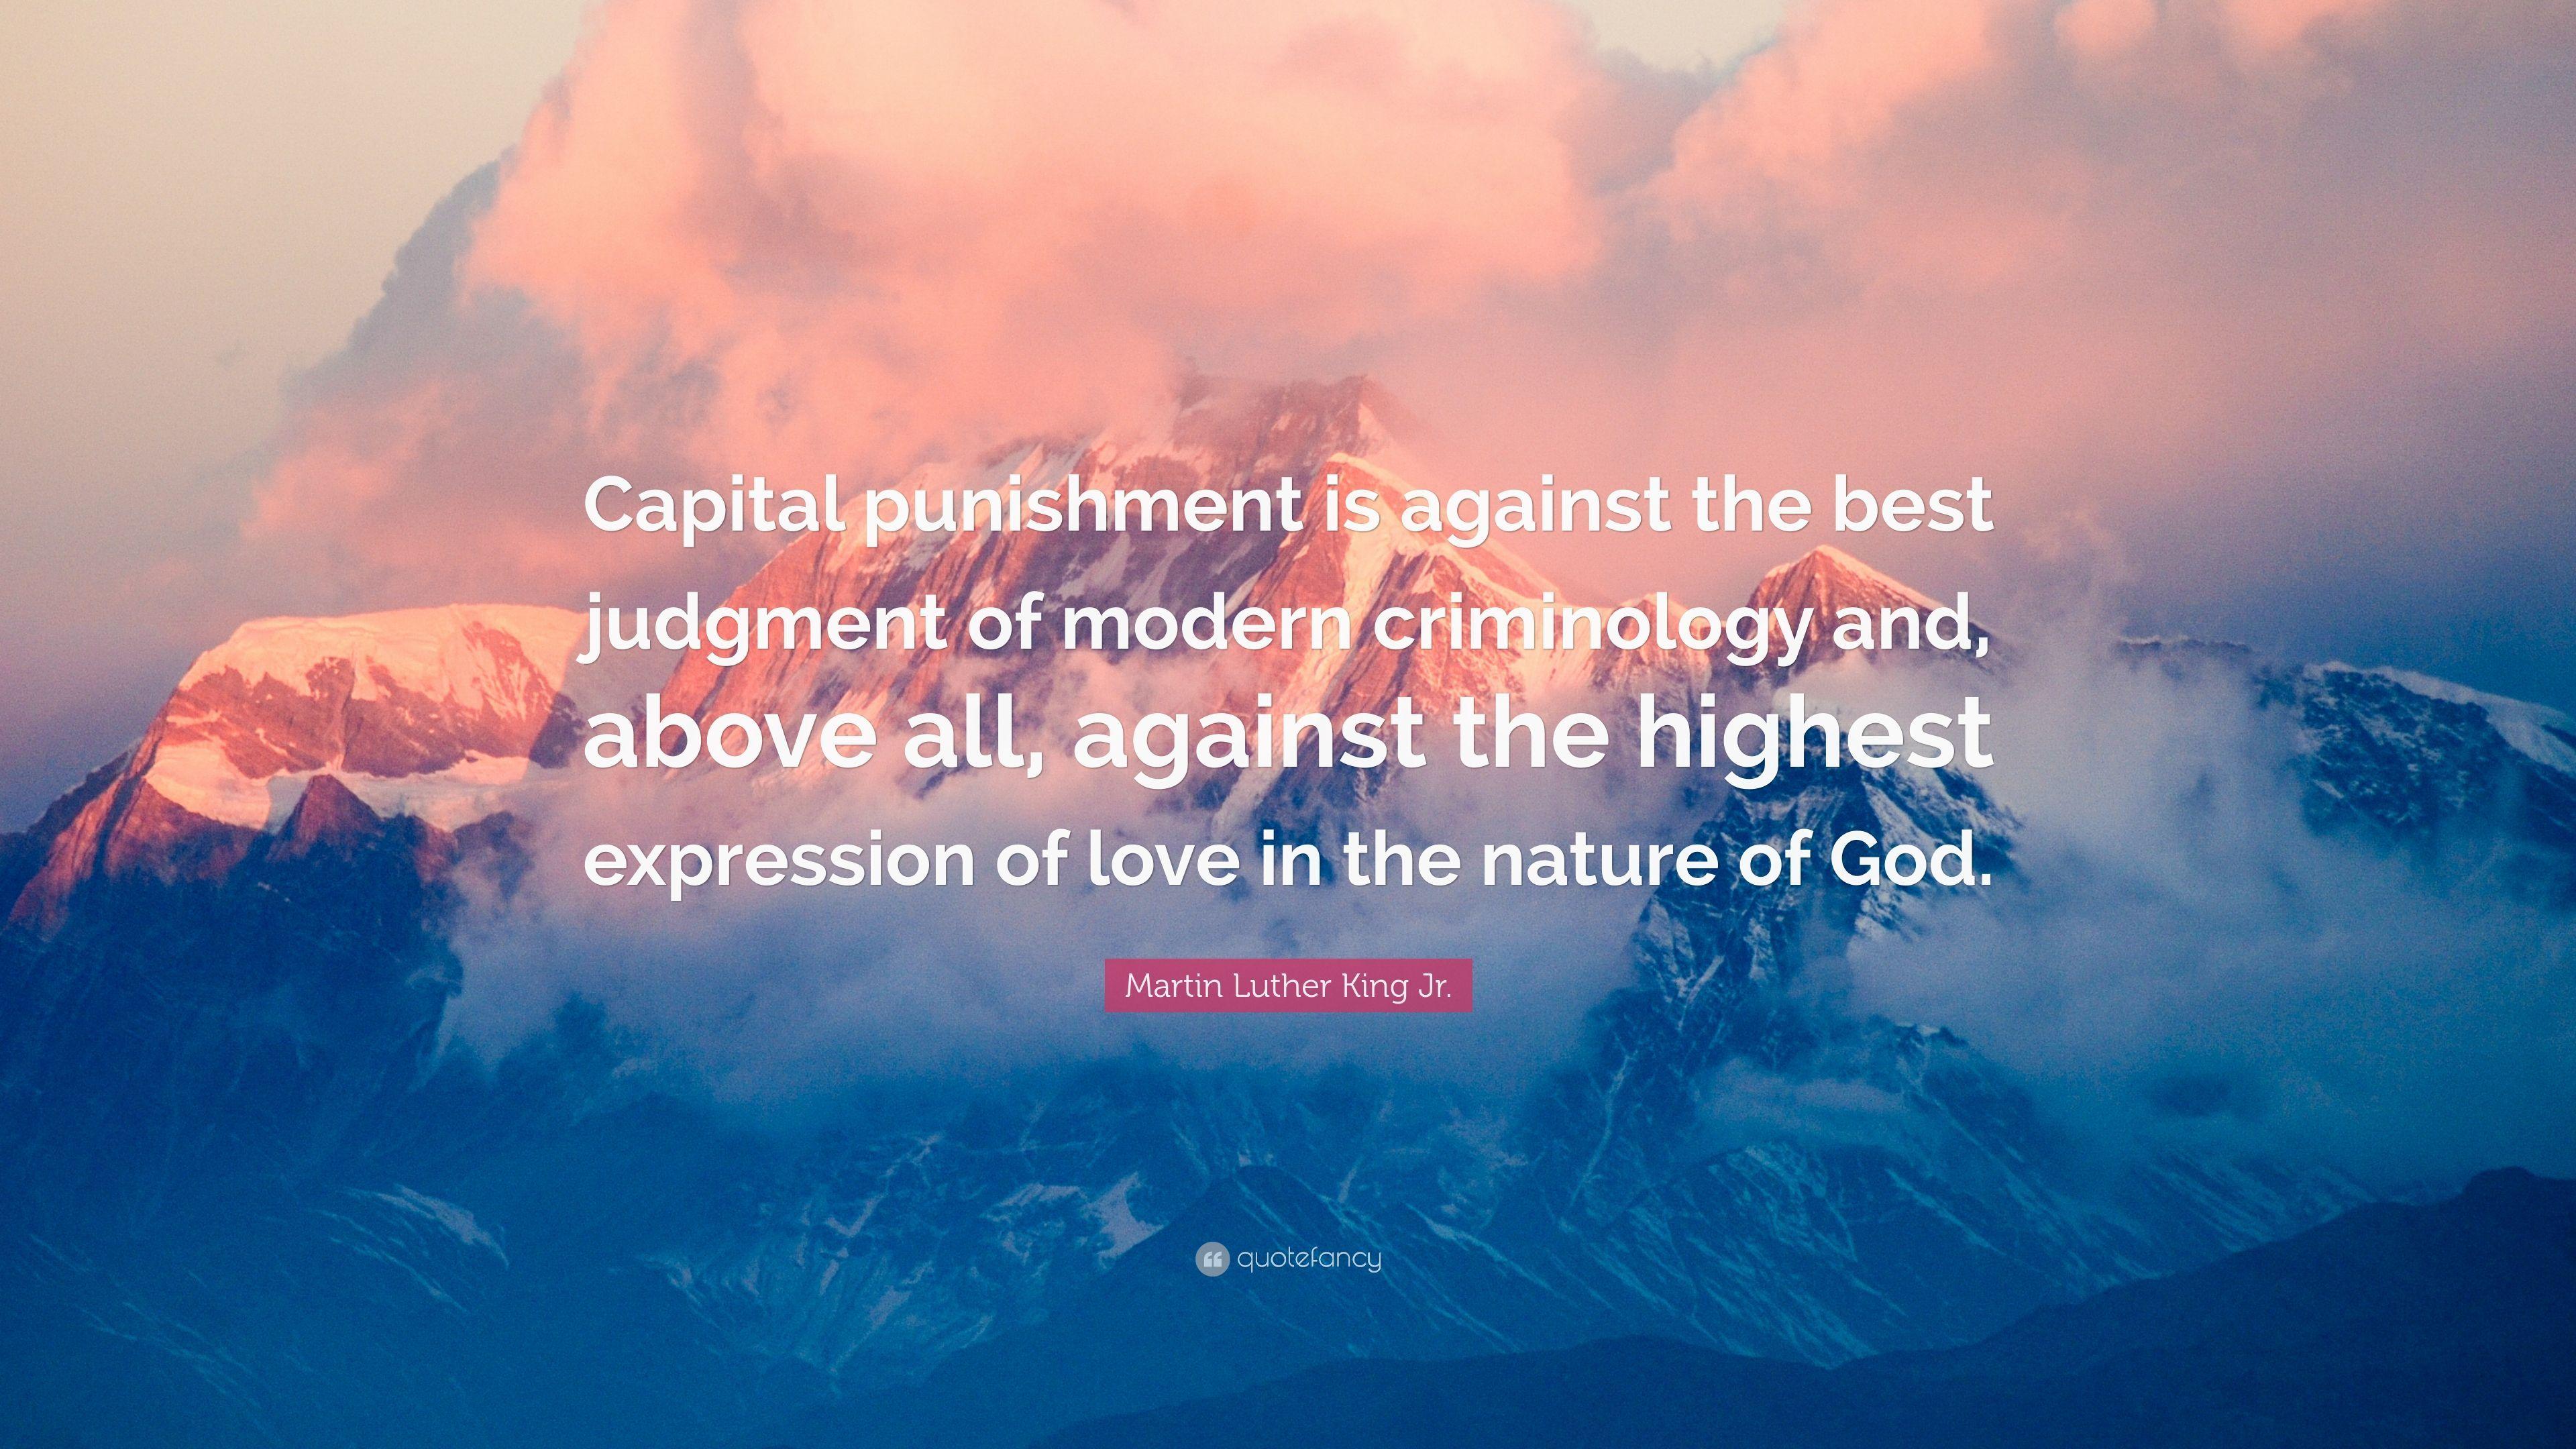 Martin Luther King Jr. Quote: “Capital punishment is against